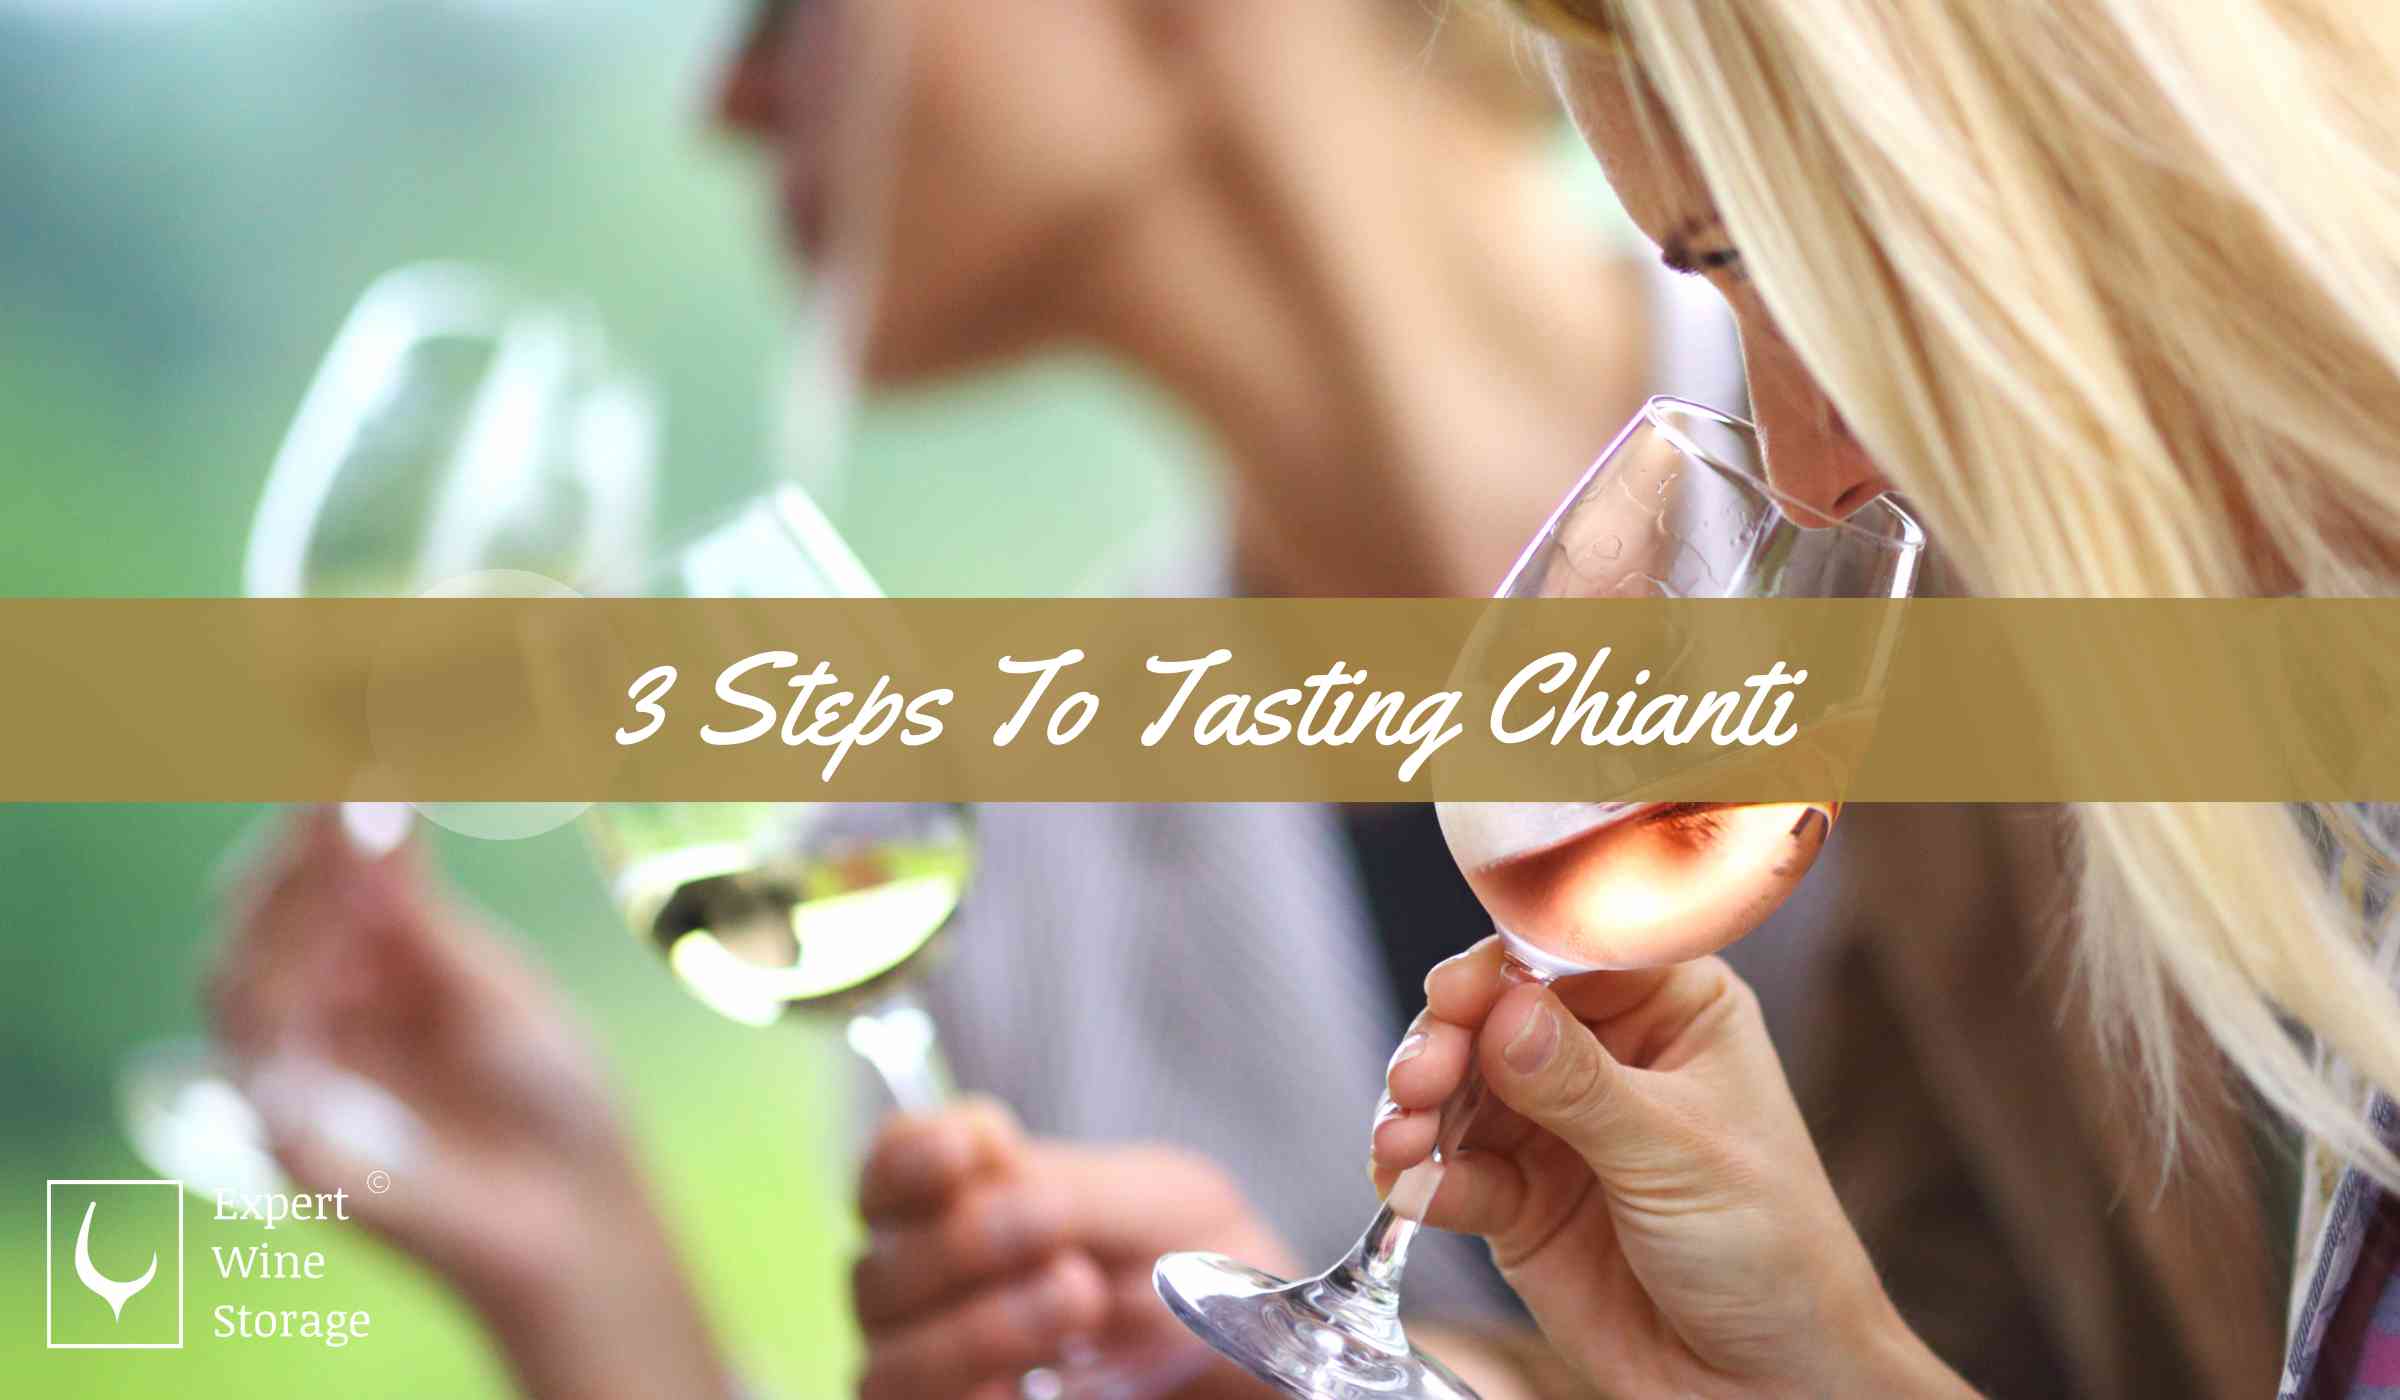 Process for Tasting Wine